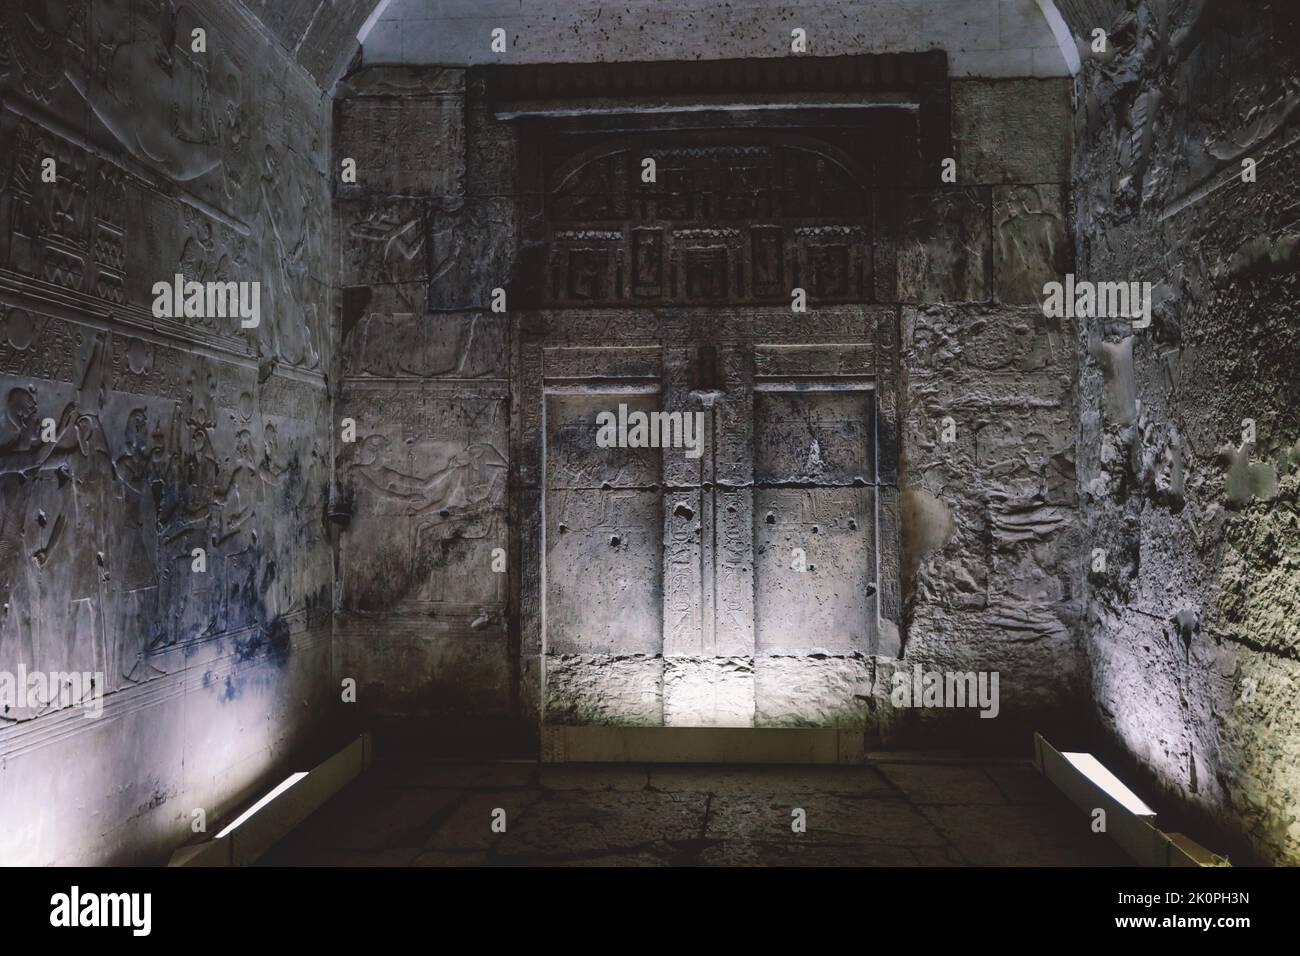 Inside View of the temple of Seti I, which is also known as the Great Temple of Abydos, in Kharga, Egypt Stock Photo